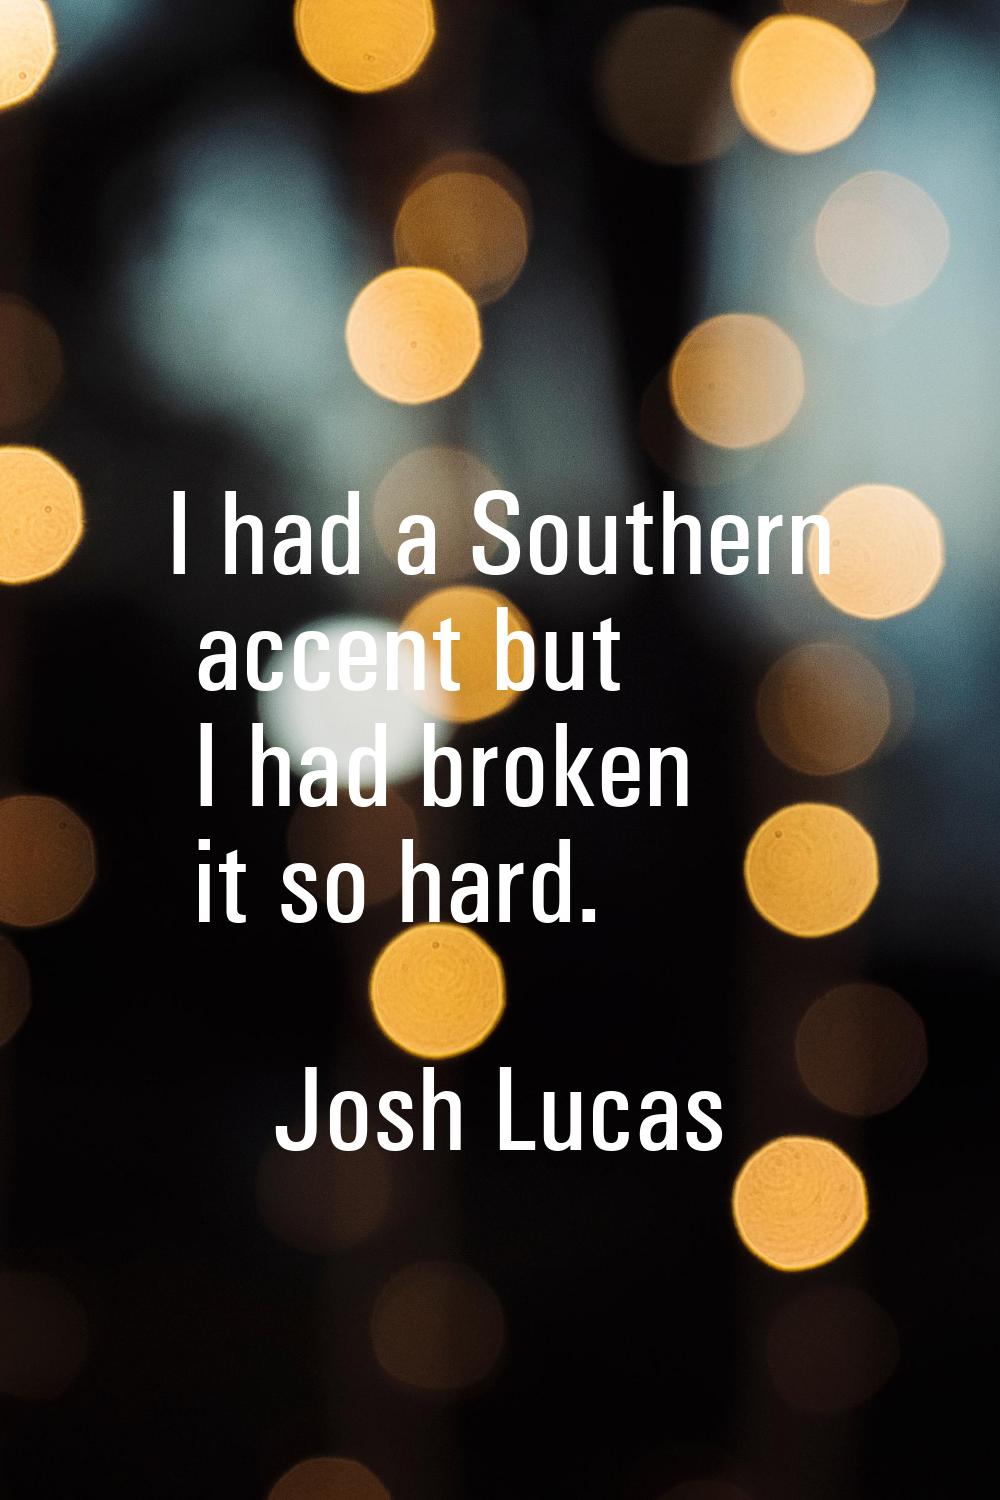 I had a Southern accent but I had broken it so hard.